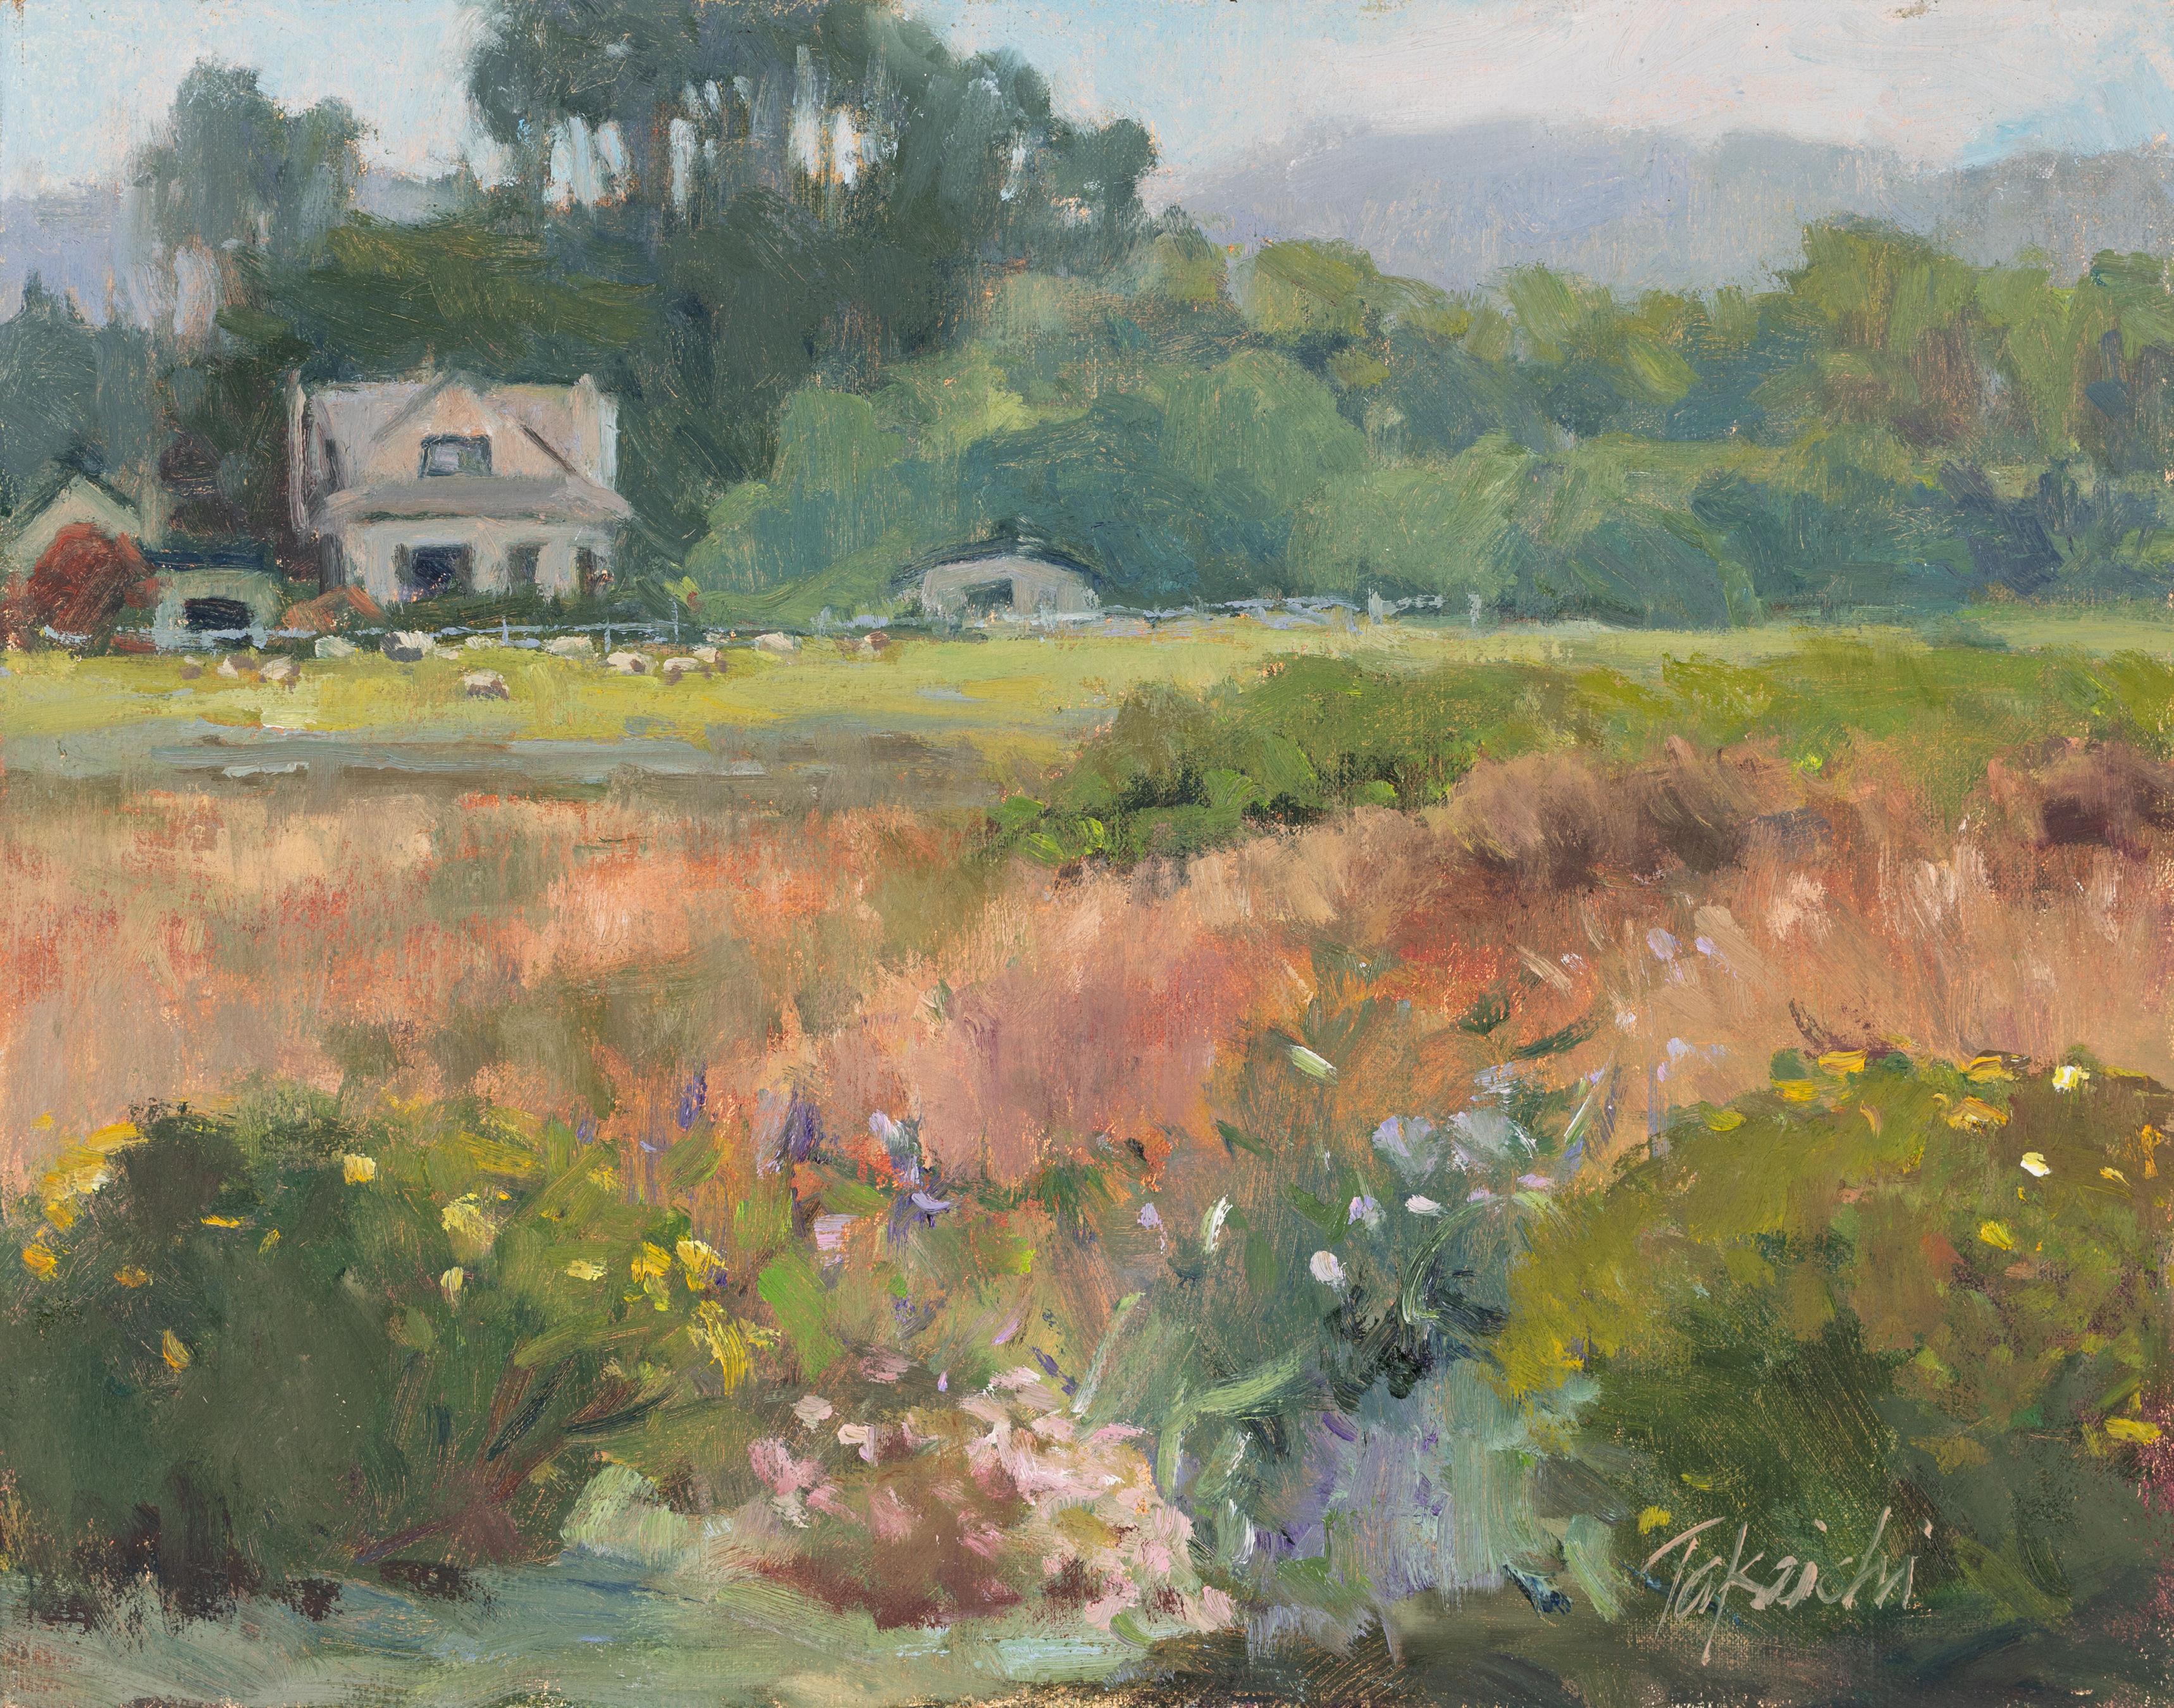 Nancy Takaichi Landscape Painting - "Spring at Mission Ranch" Plein air oil painting of Carmel Valley Ranch + house